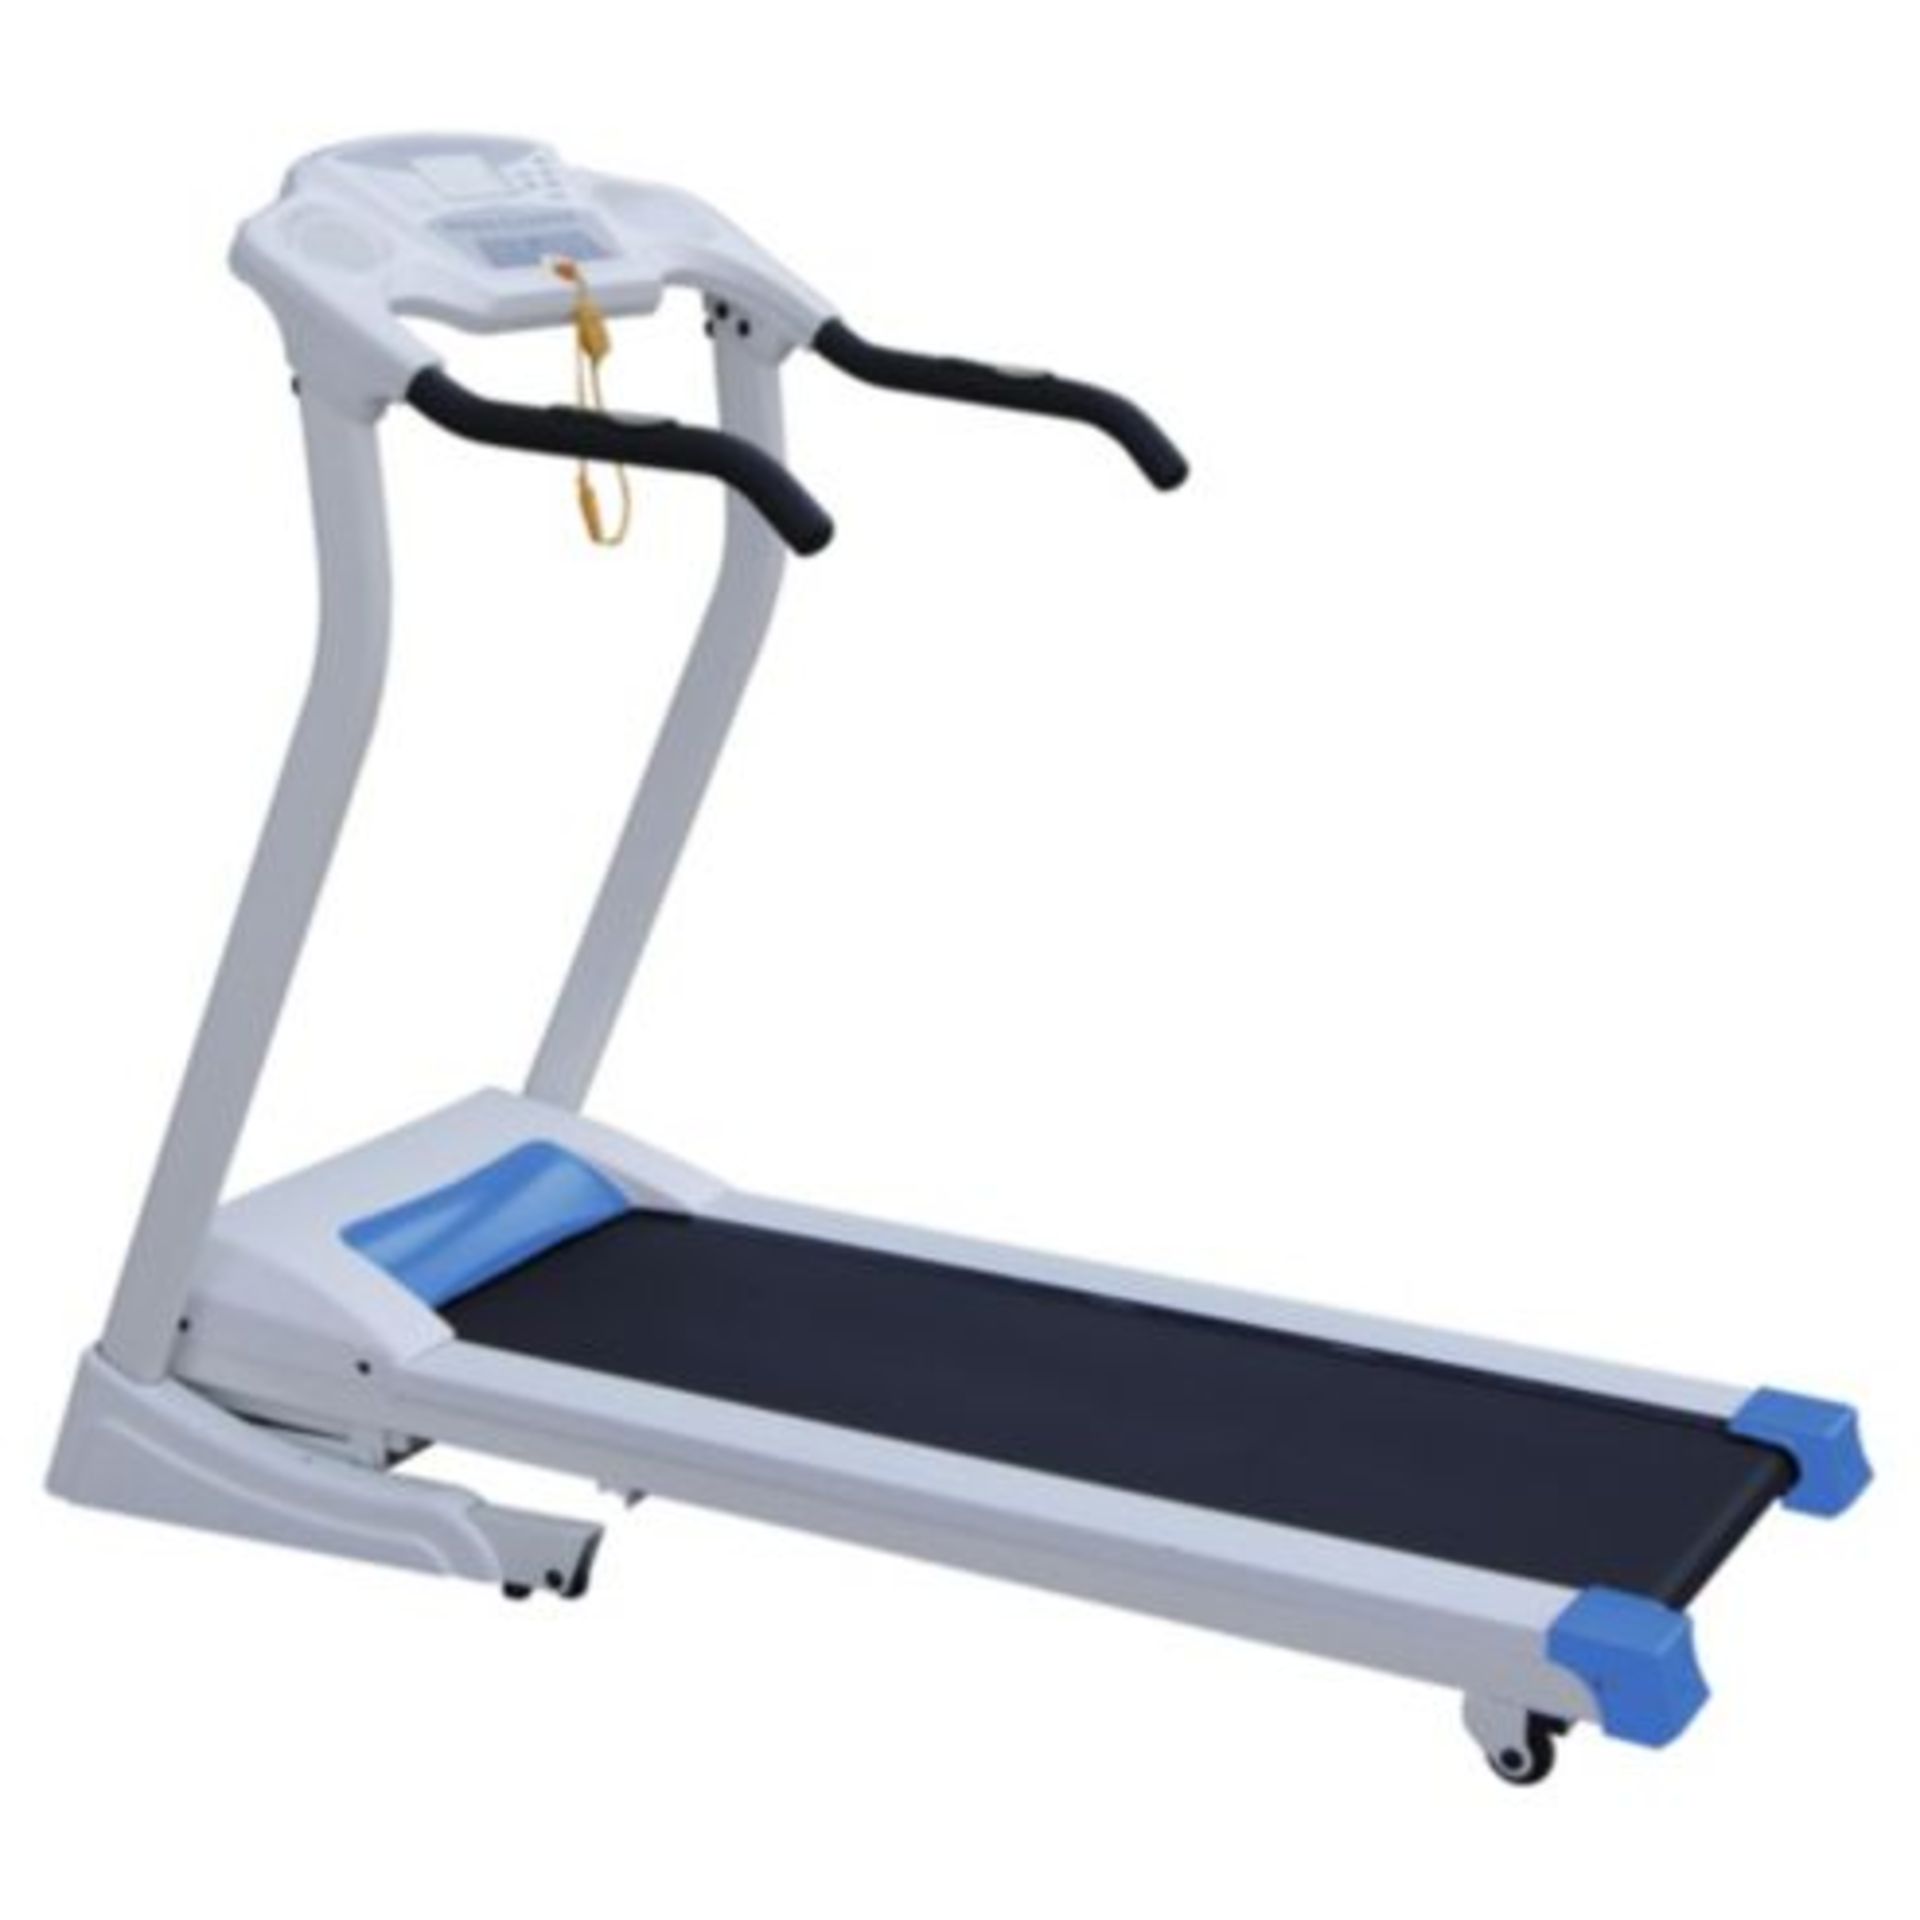 V Brand New Motorised Treadmill with 1.5hp Motor - Shock Absorbing Deck - LCD Monitor Displaying - Image 2 of 2